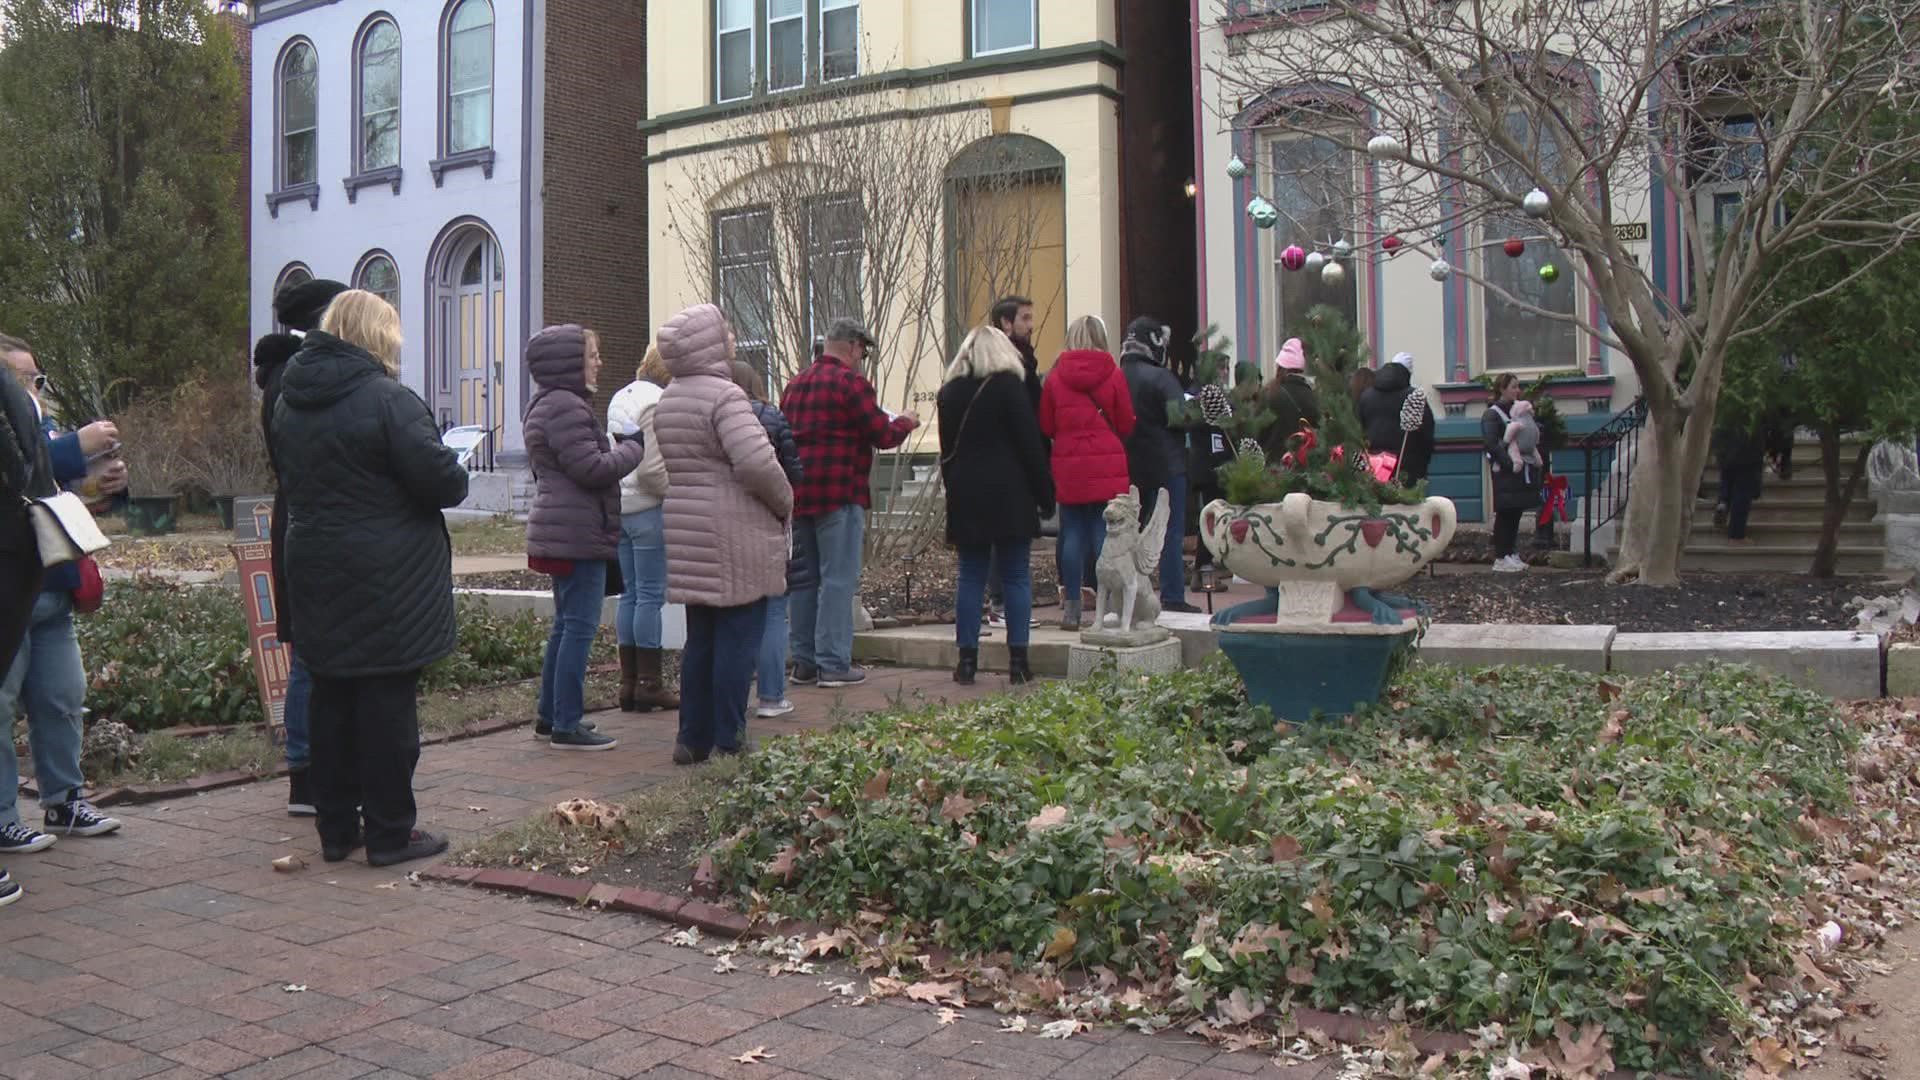 The Lafayette Square Holiday Market supported the community and small businesses throughout the weekend. Guests got to enjoy some holiday shopping.